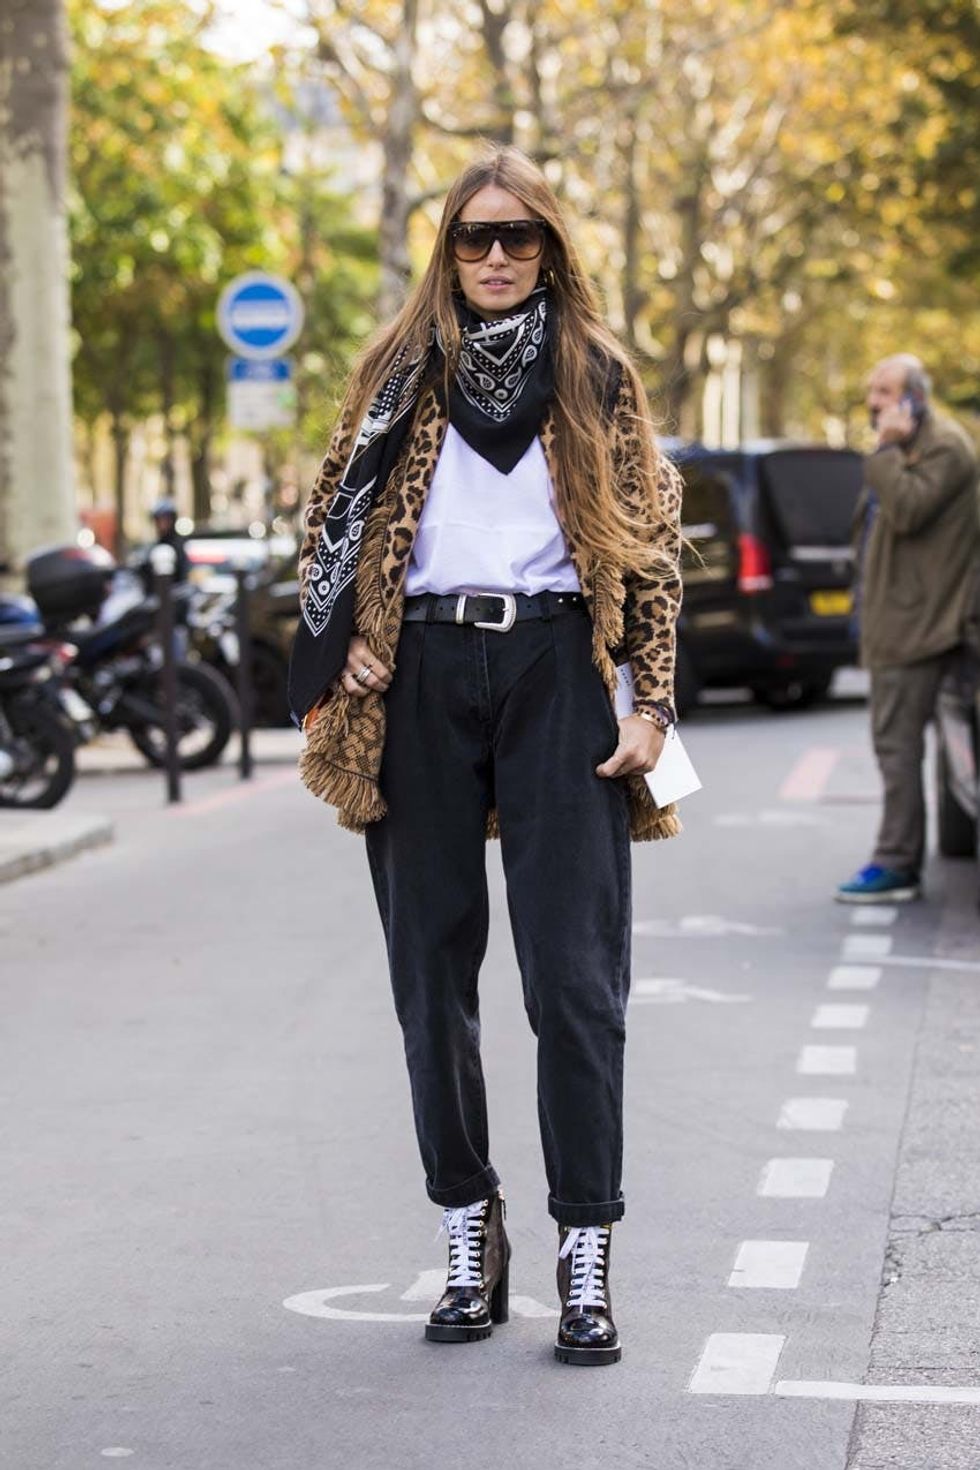 7 Fashionable Ways to Wear a Scarf This Winter - Brit + Co